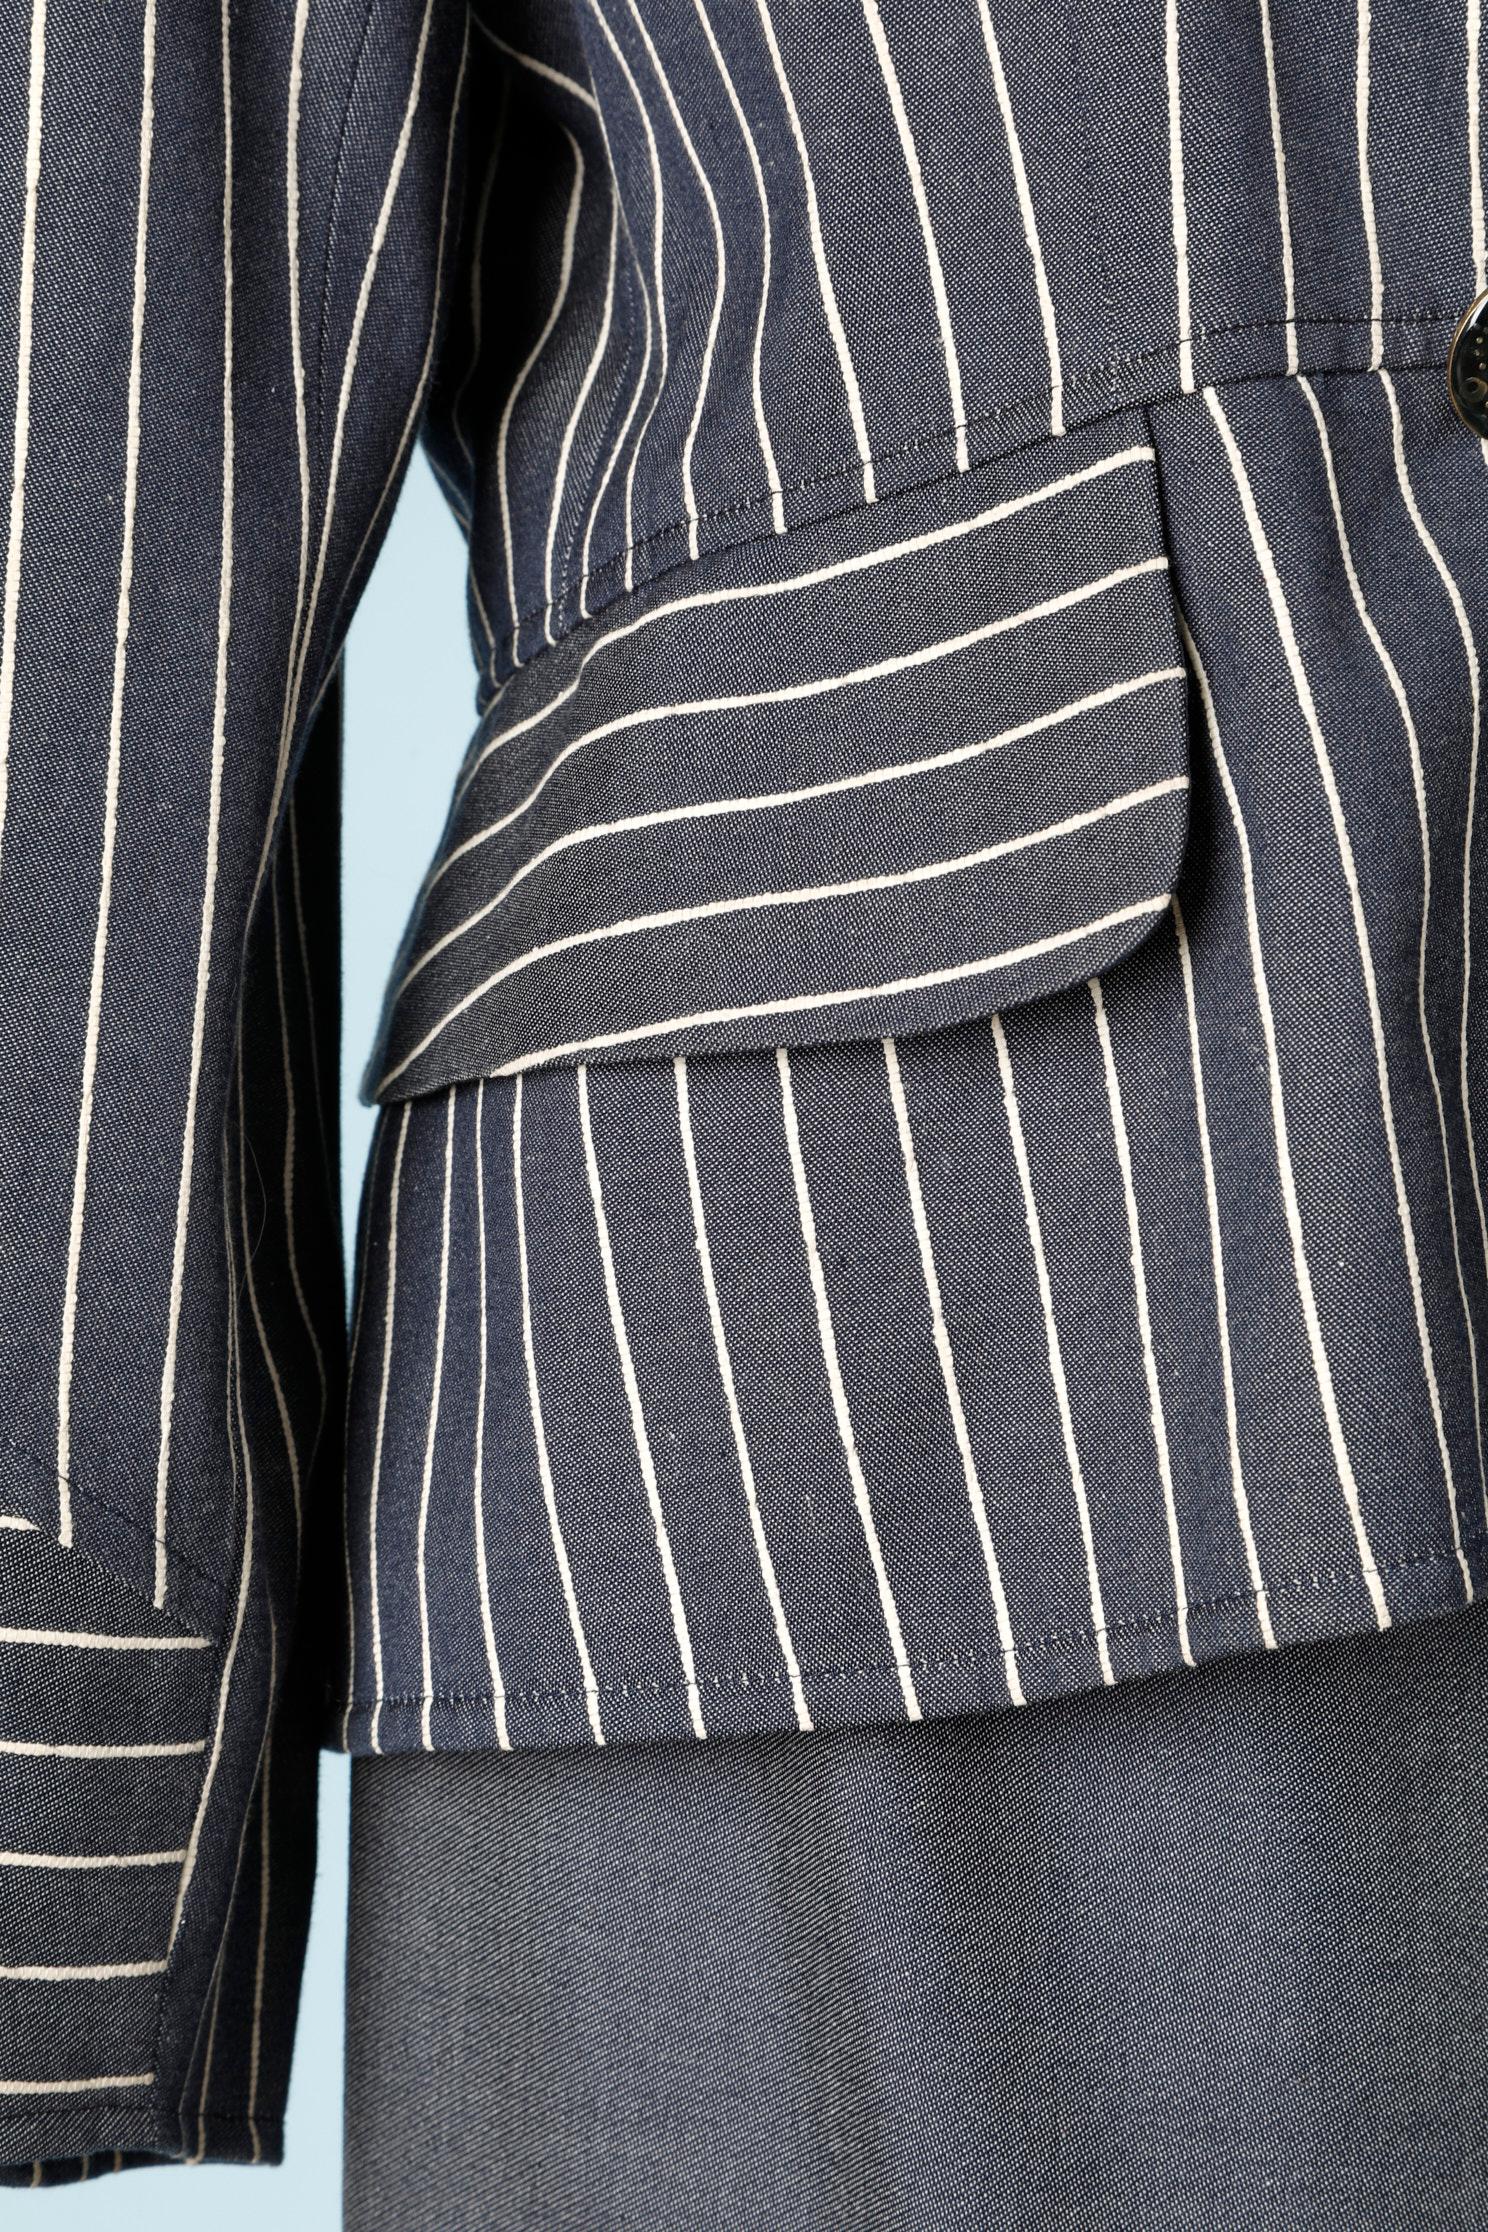 pinstrip suits